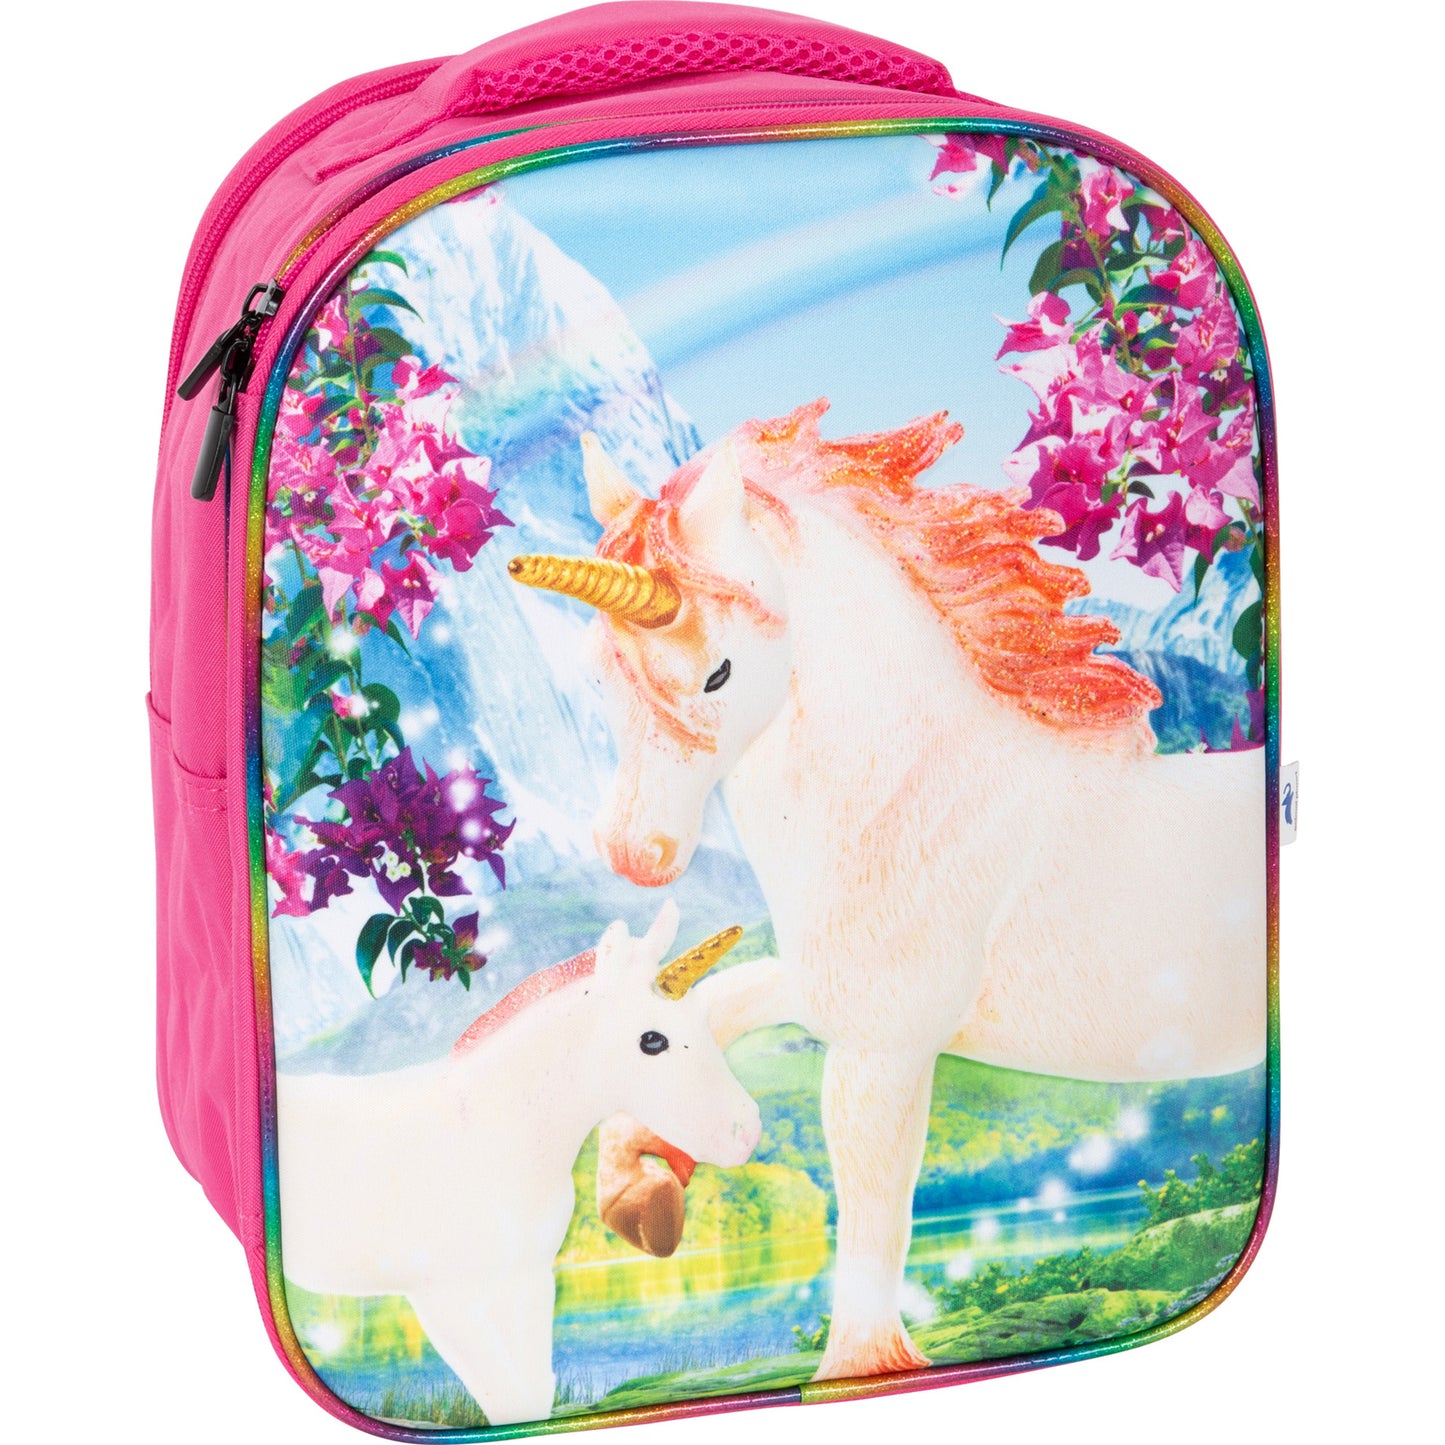 3D Fantasy Junior Backpack with 2 Figures